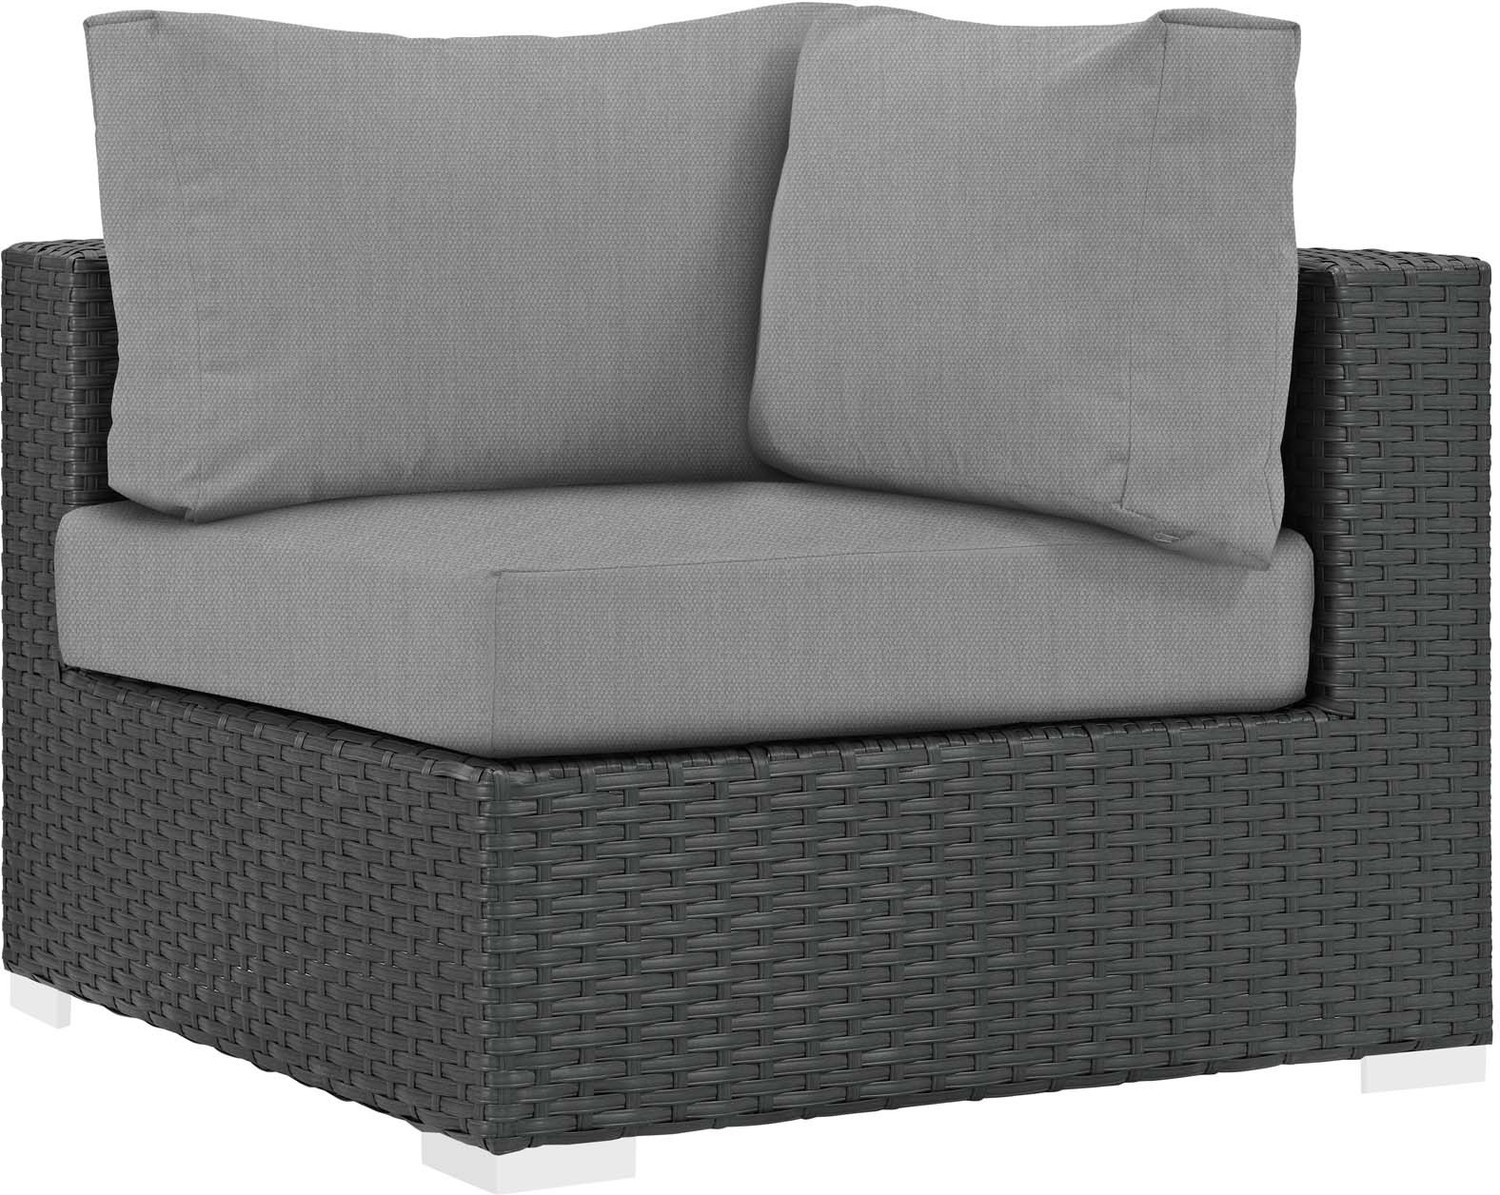 outdoor deck tables Modway Furniture Sofa Sectionals Canvas Gray